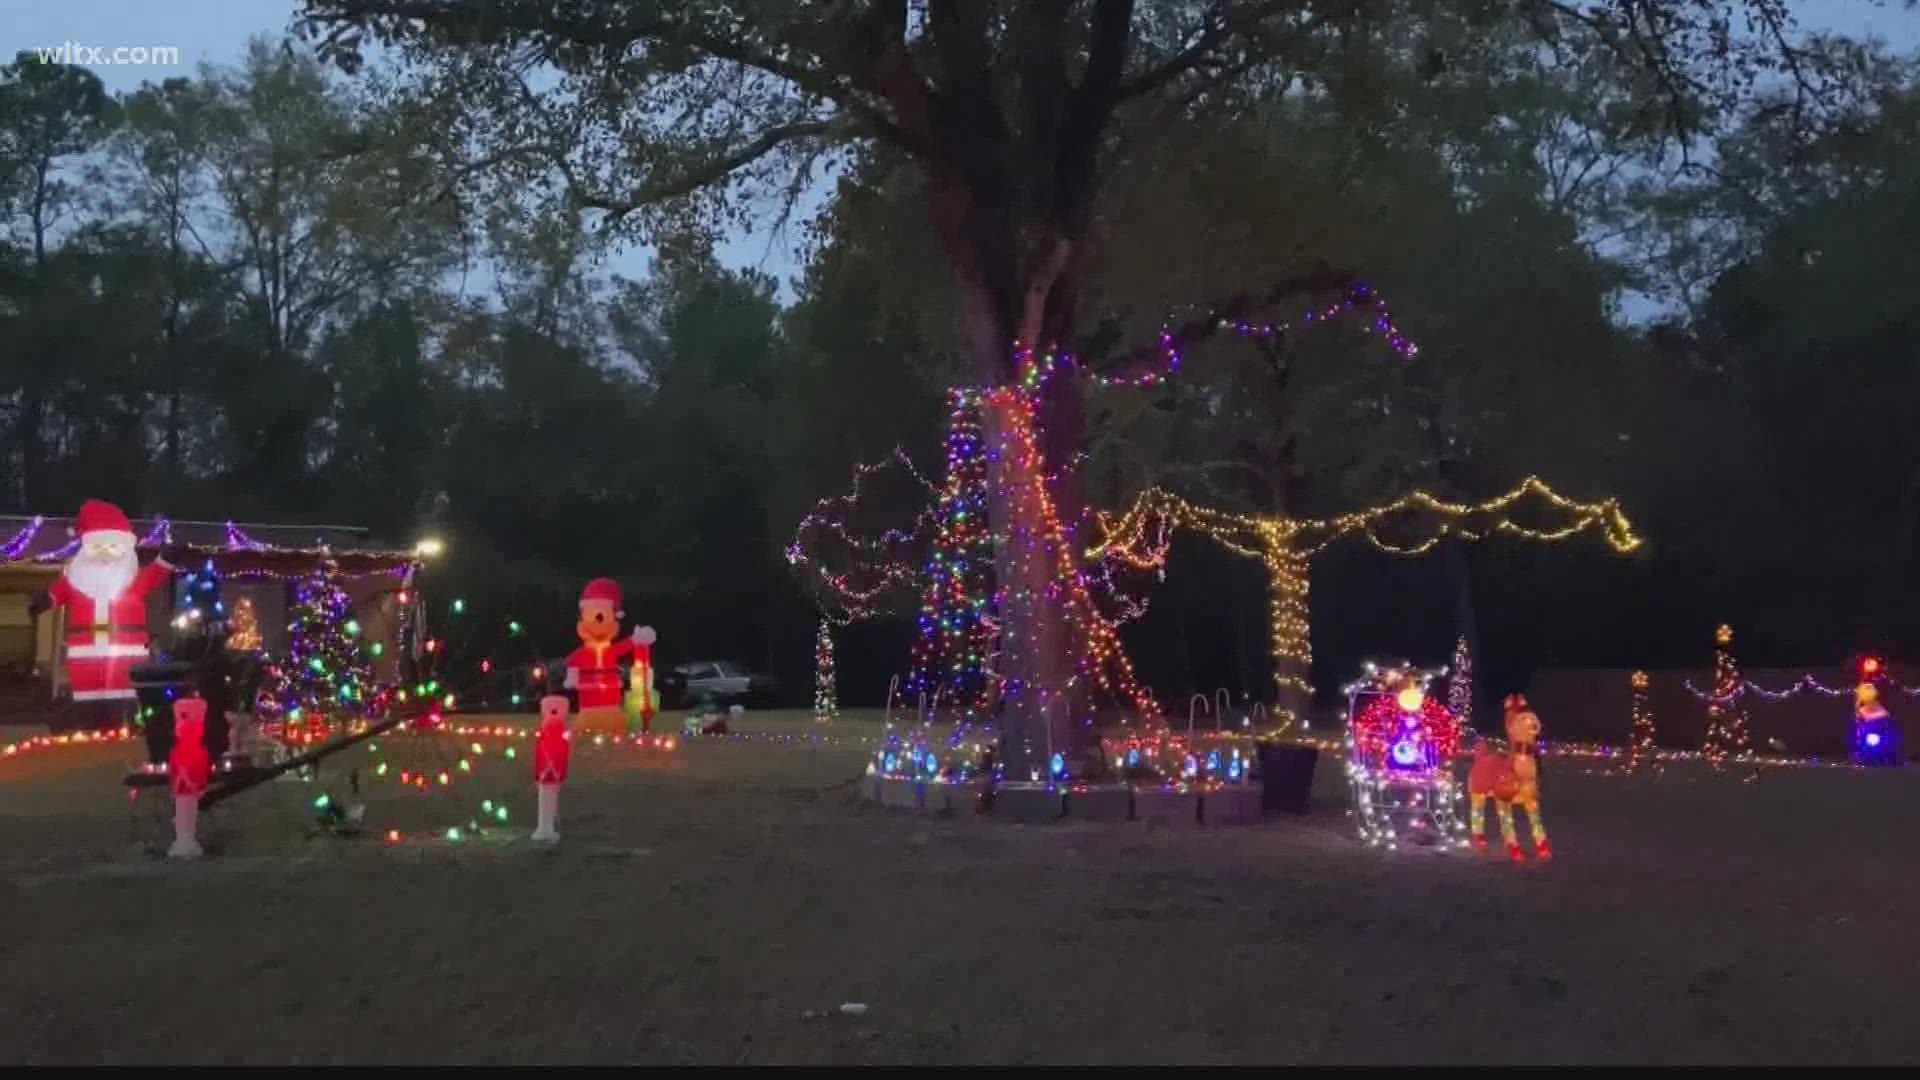 Bright lights and holiday cheer fill James Thomas's heart and front yard as he puts up 22,000 lights for Christmas.